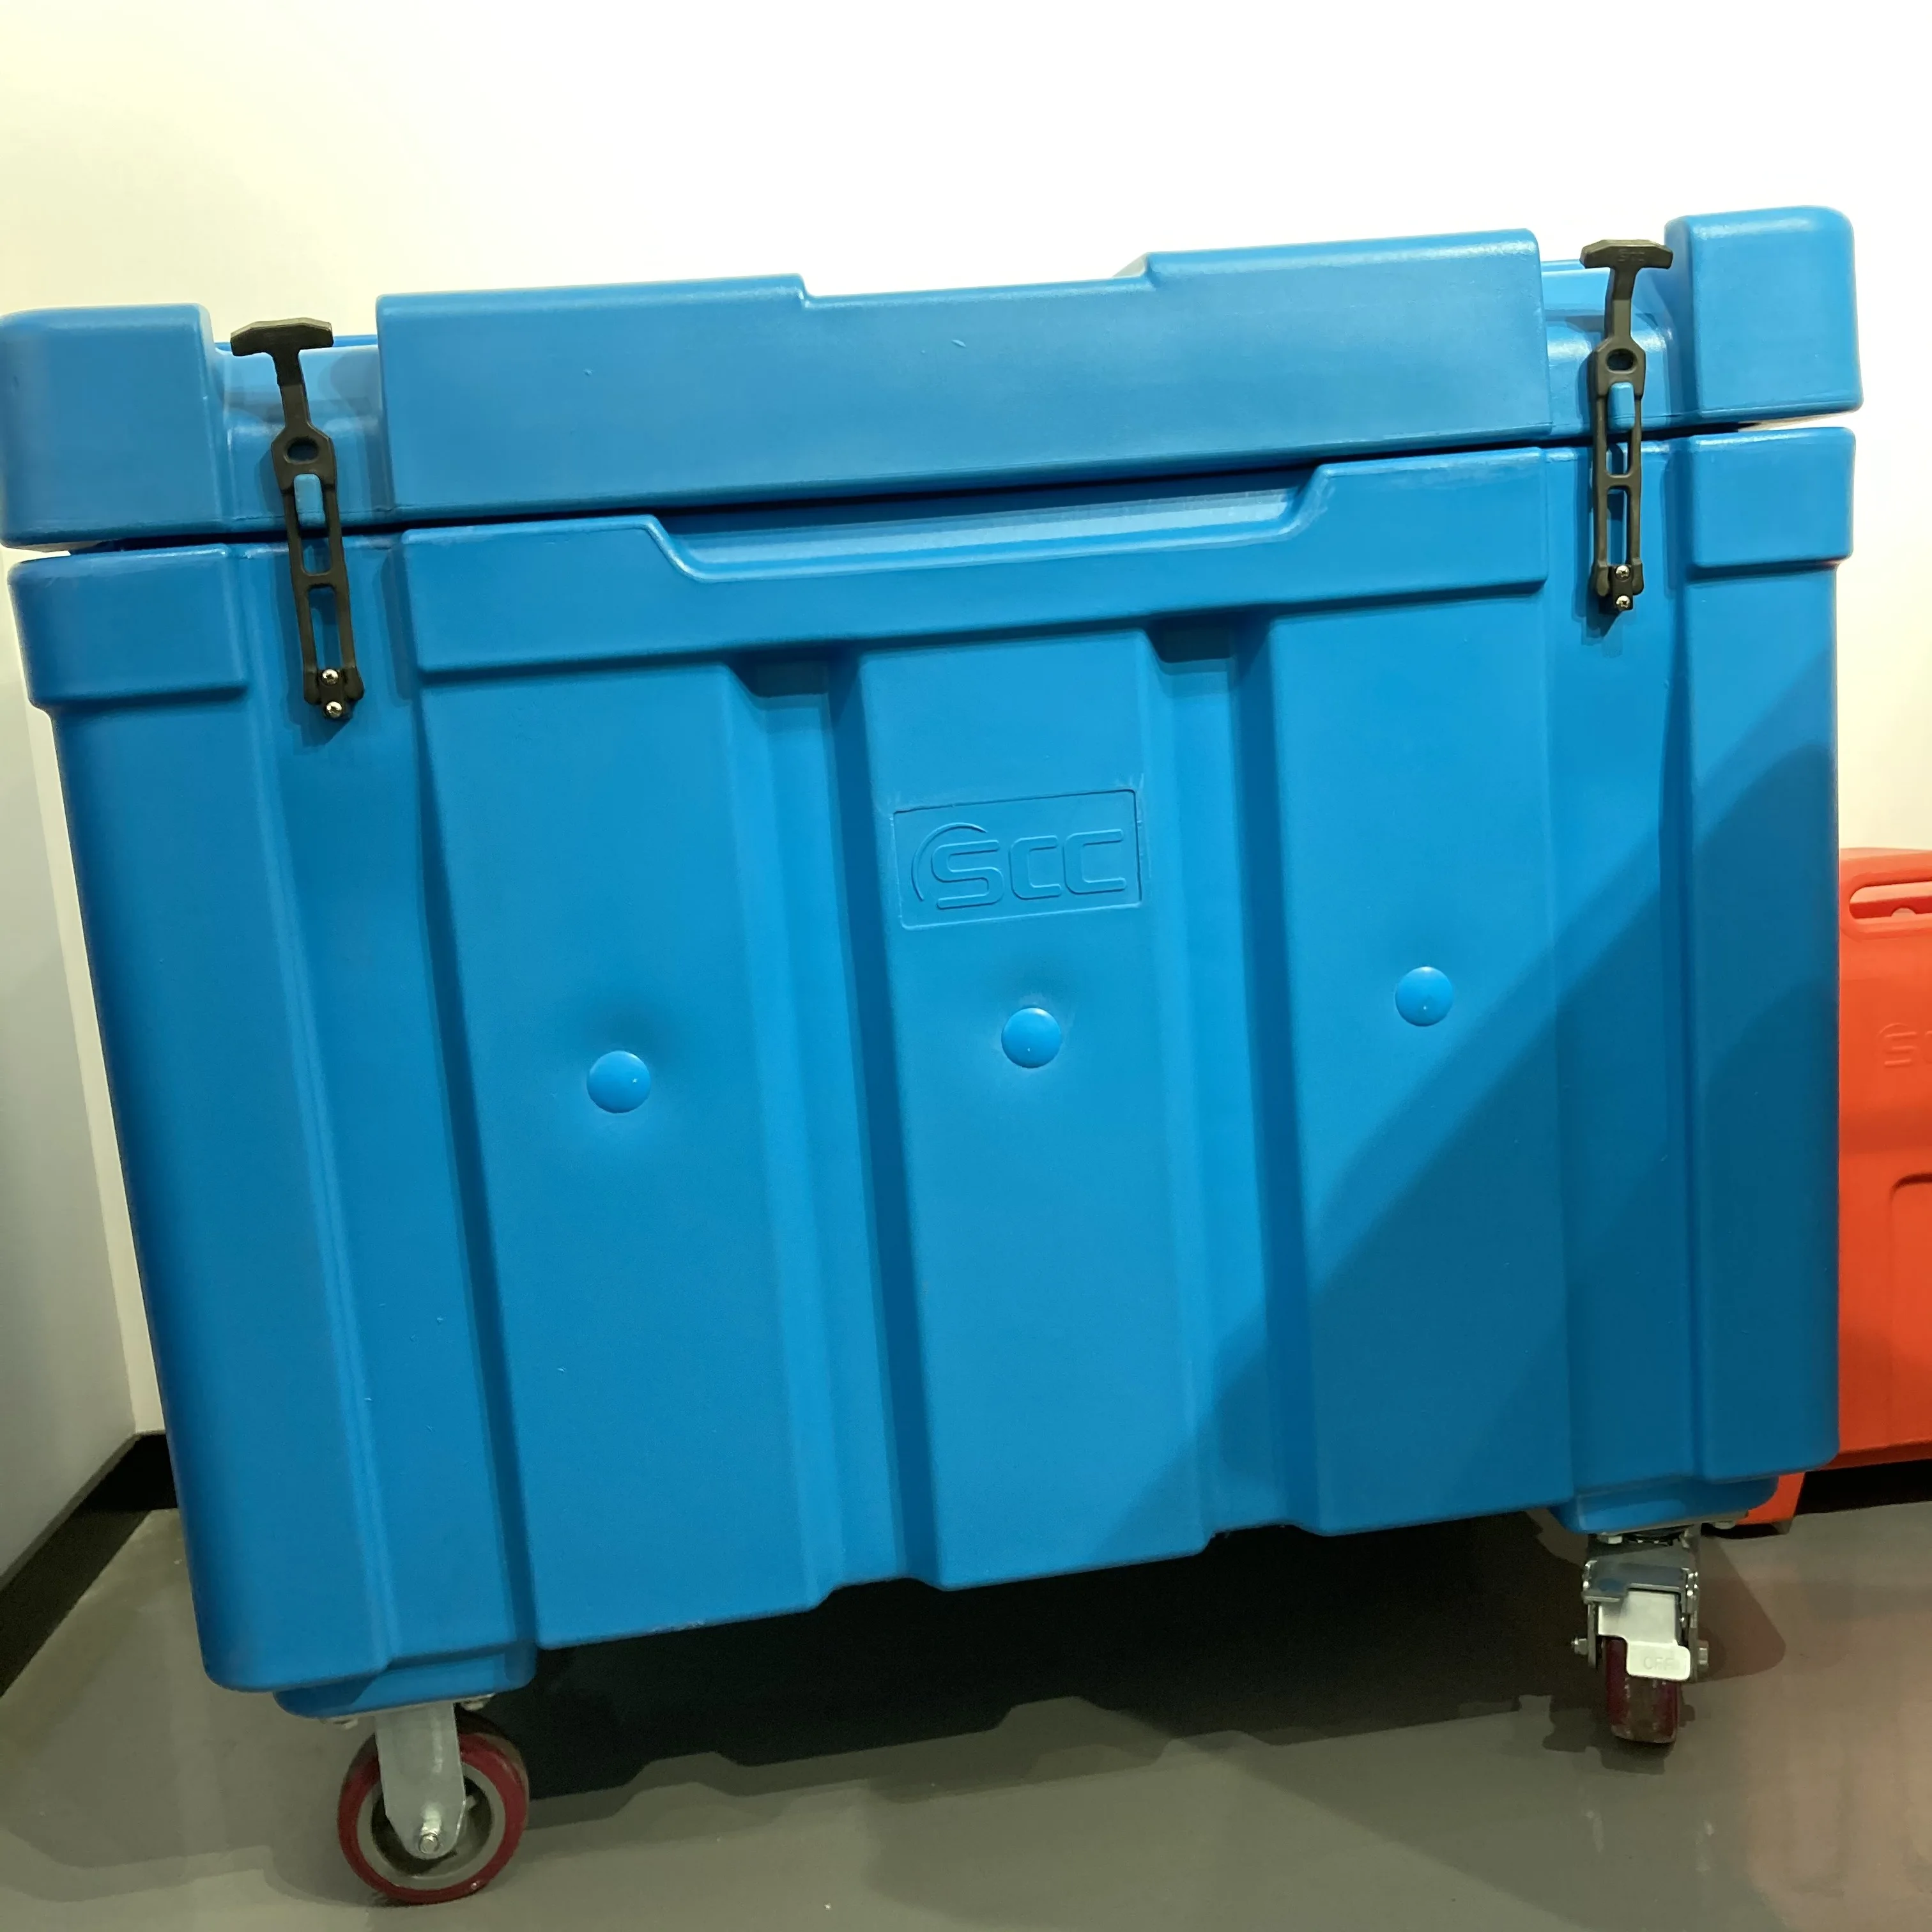 Dry Storage Container – Niagara Energy Products